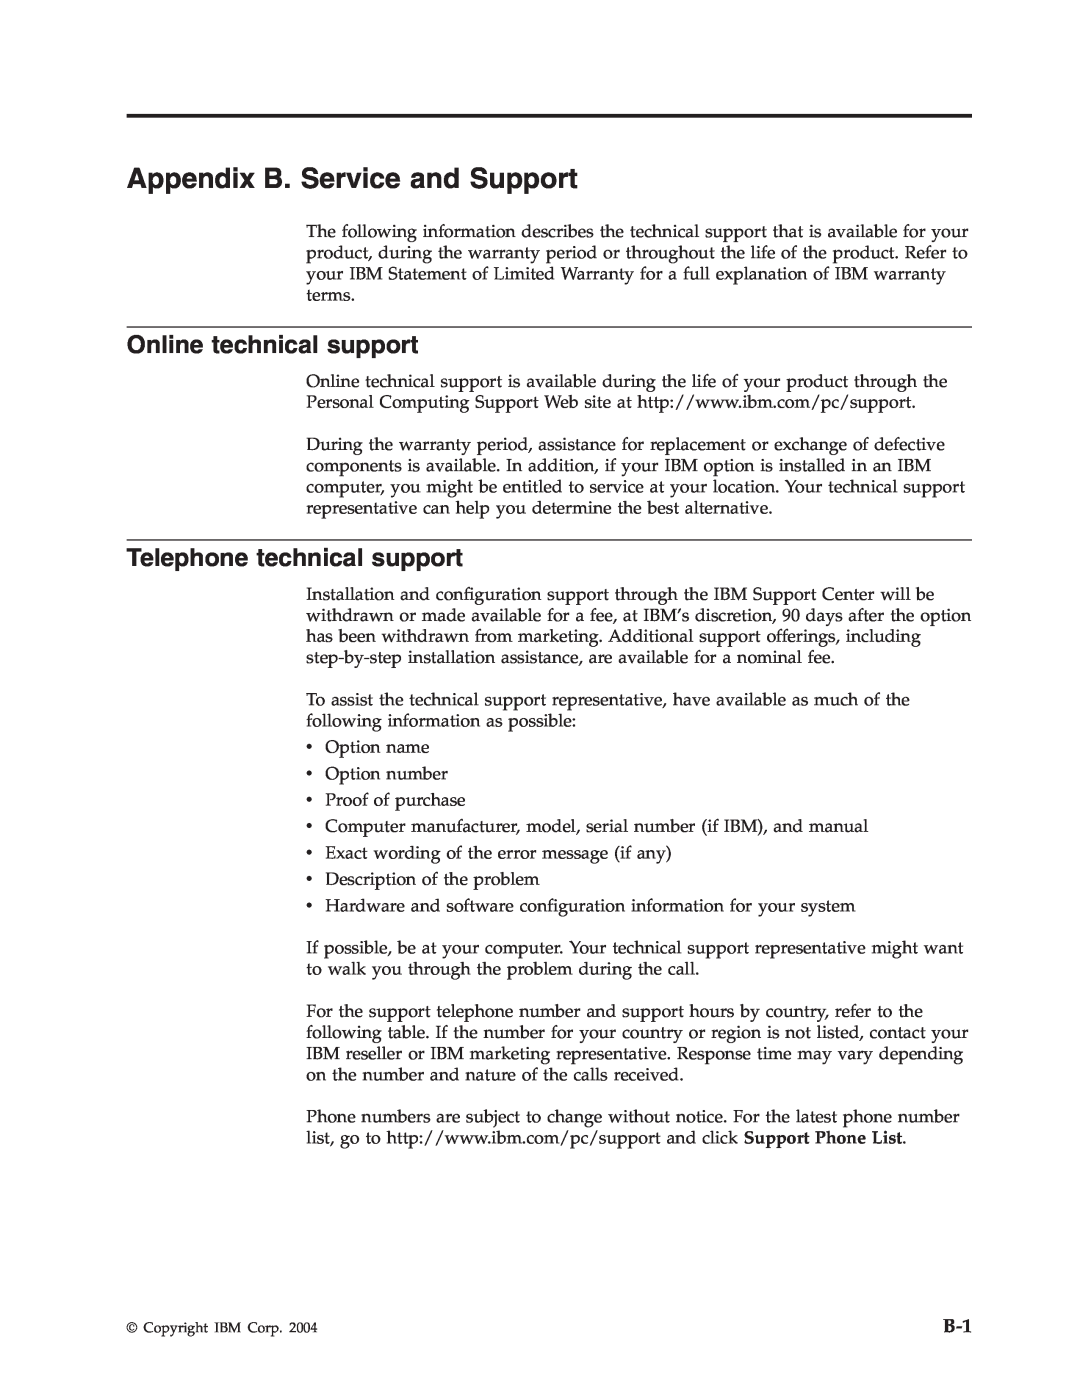 IBM 73P3315 manual Appendix B. Service and Support, Online technical support, Telephone technical support 